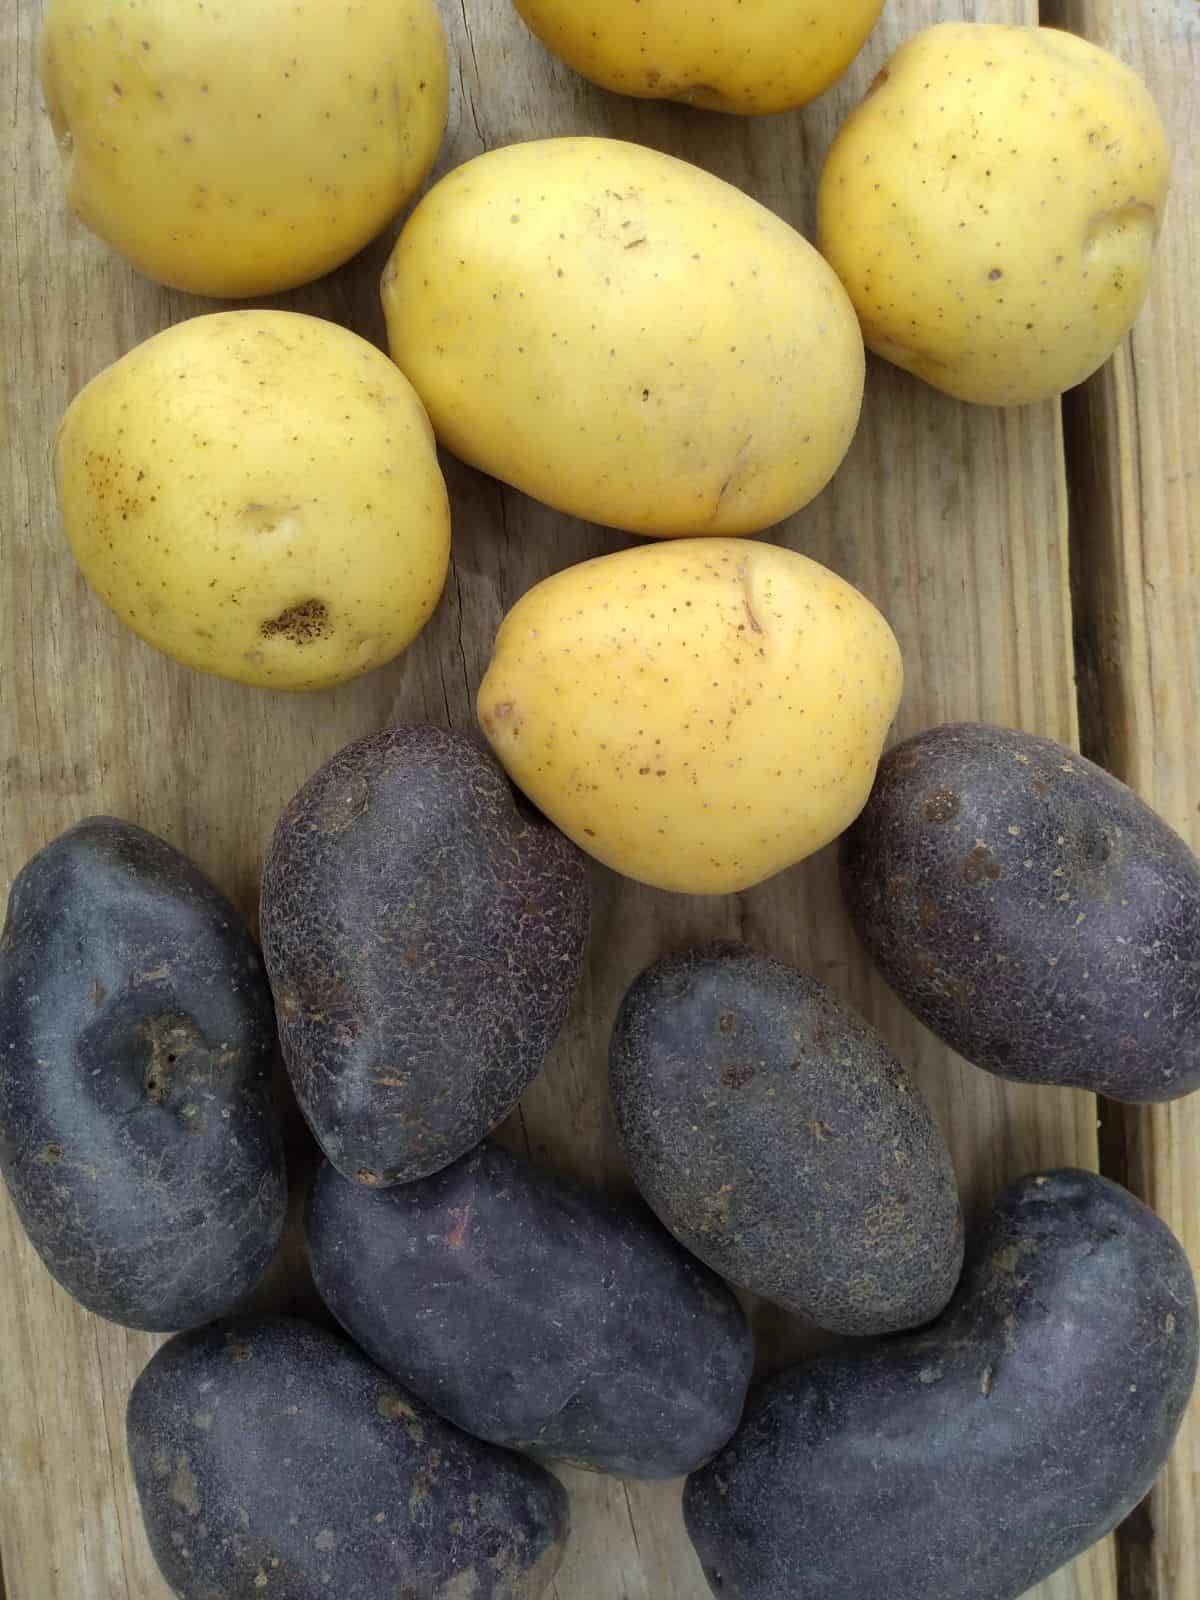 A wood picnic table with yellow potatoes on top and purple potatoes on the bottom.